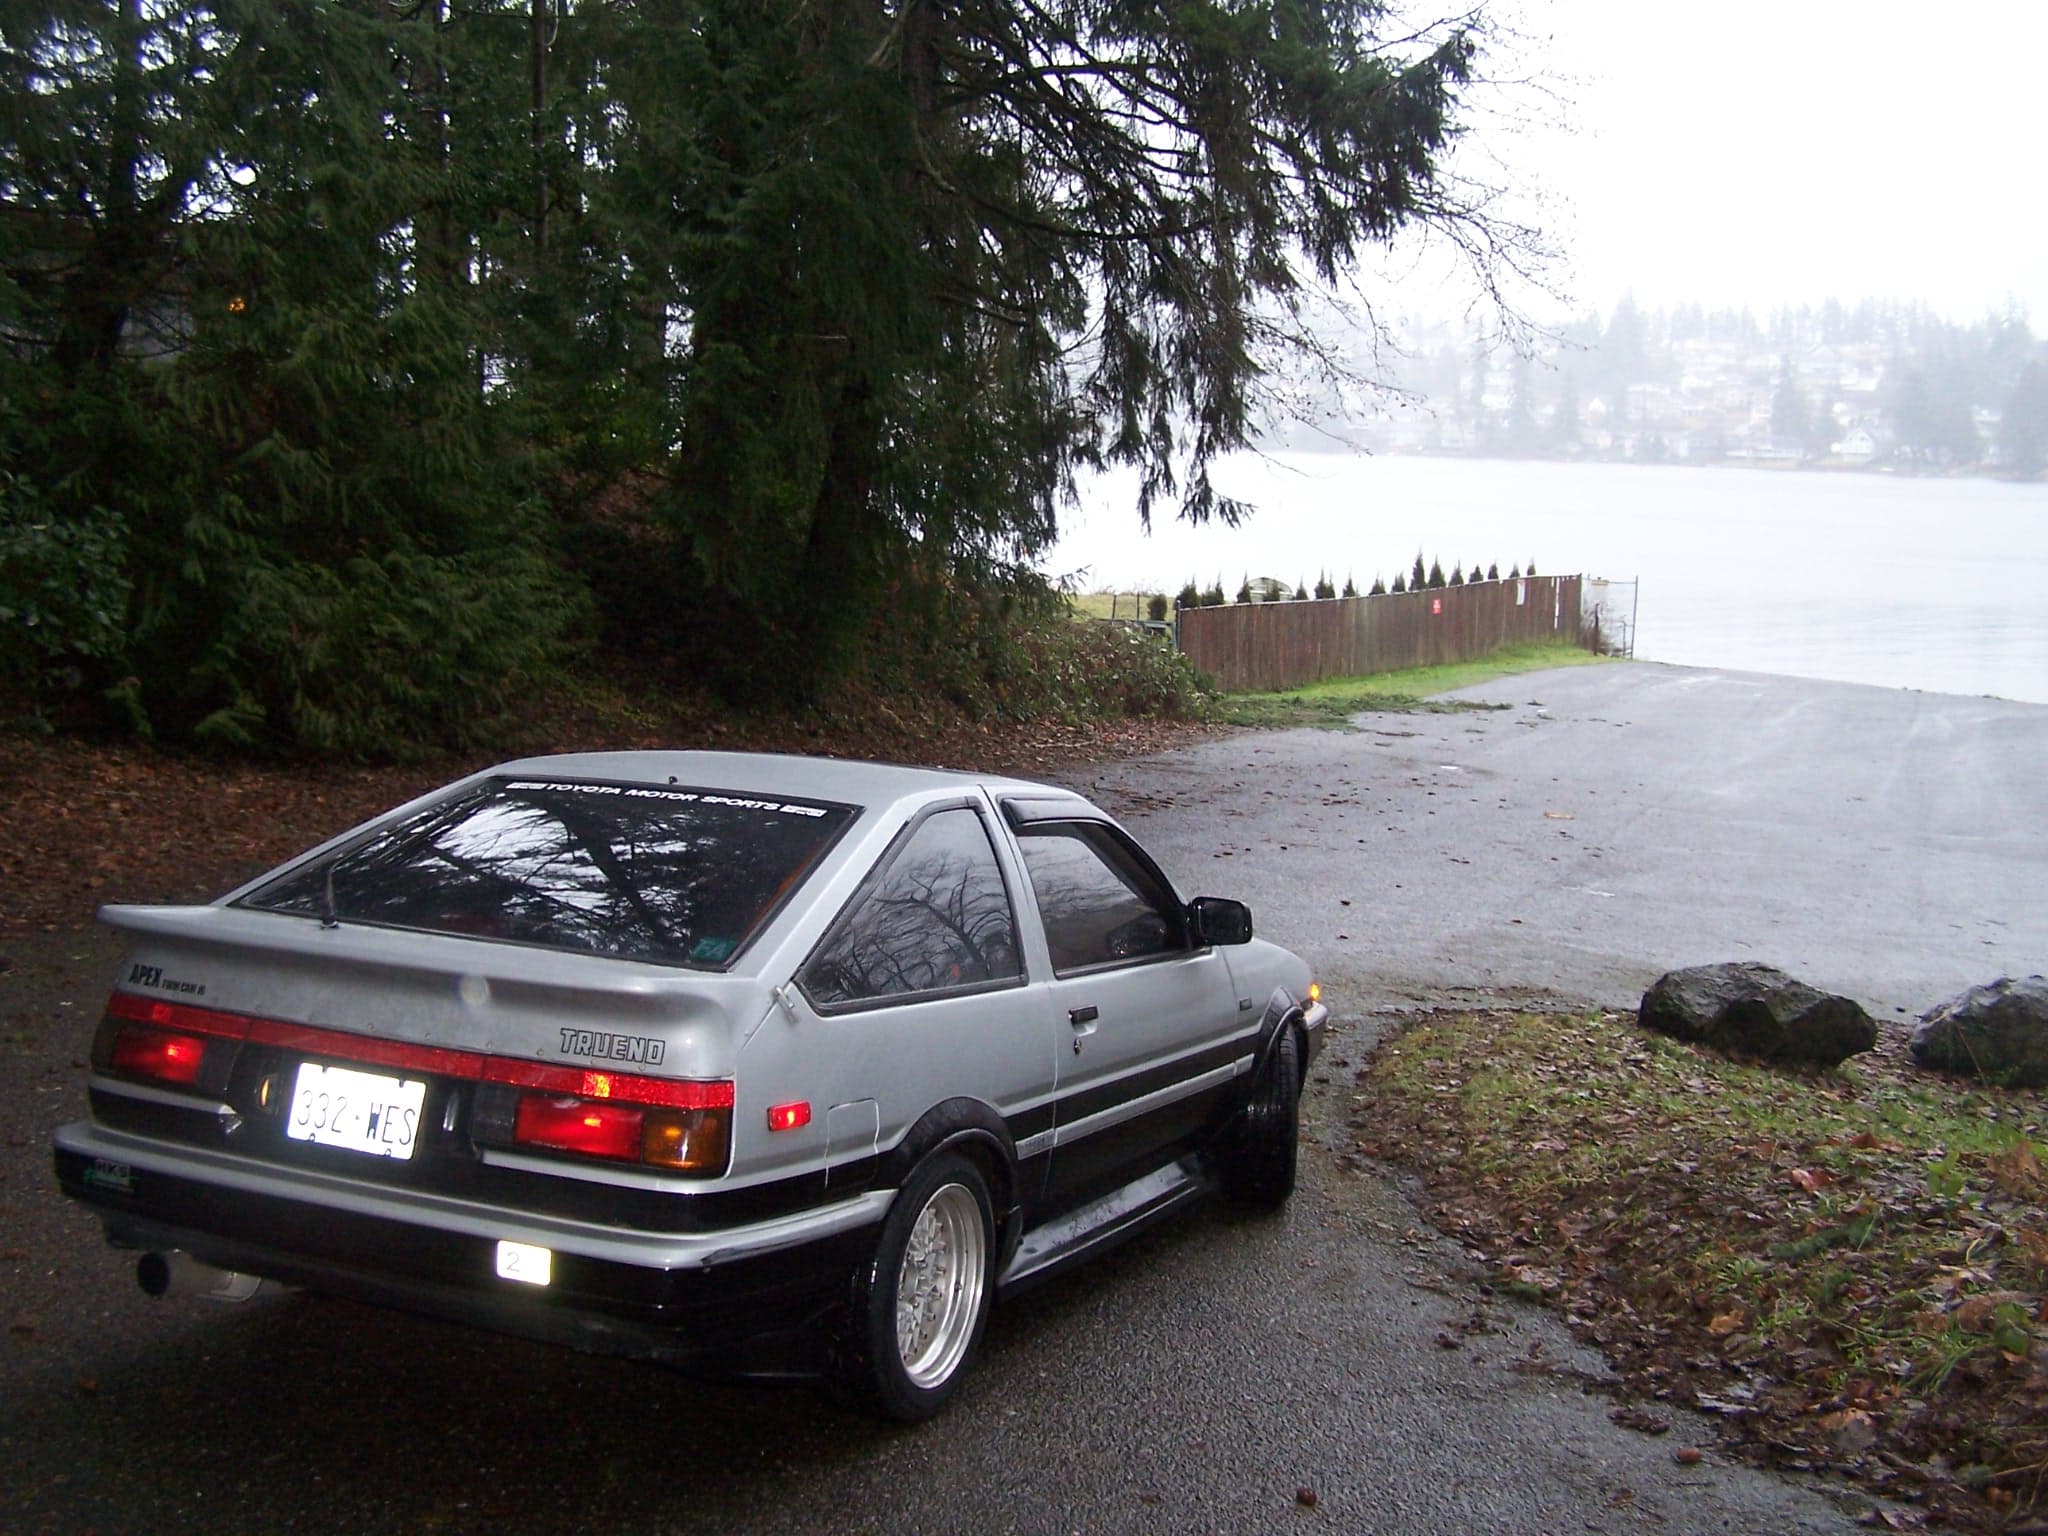 A car parked on the side of road - Toyota AE86